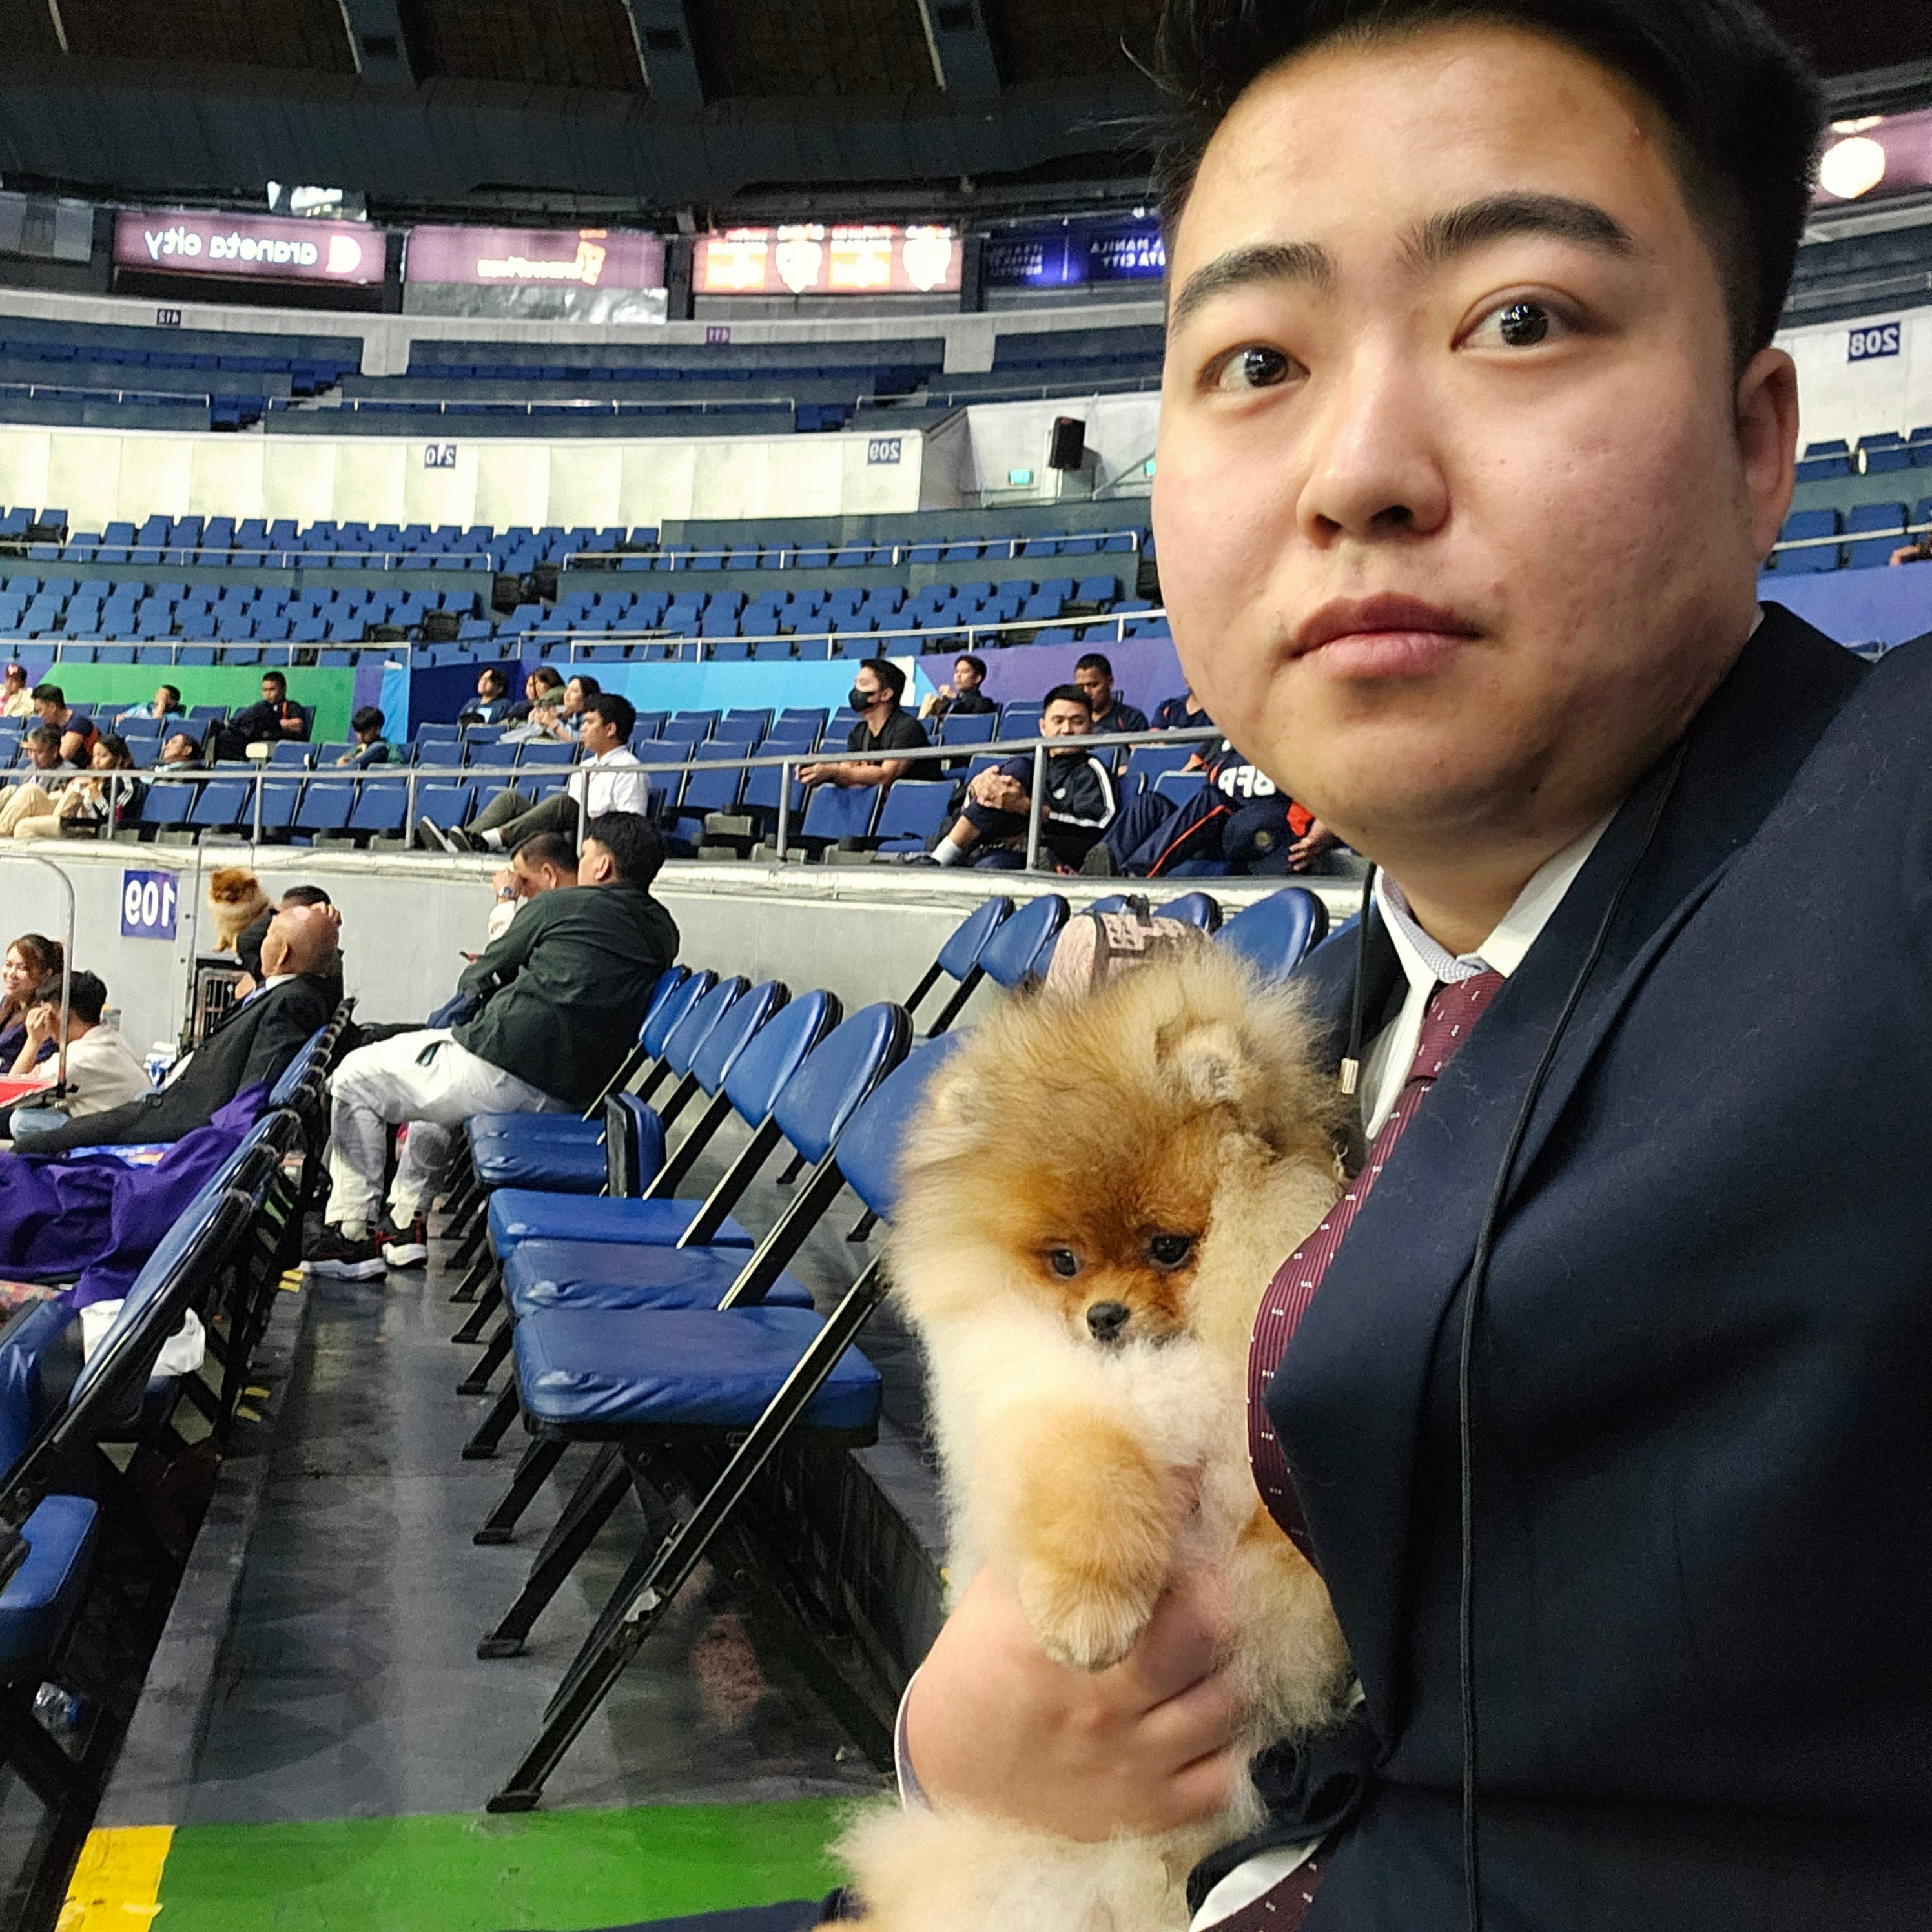 The Pomeranian continues to be a favorite around the world, but why?